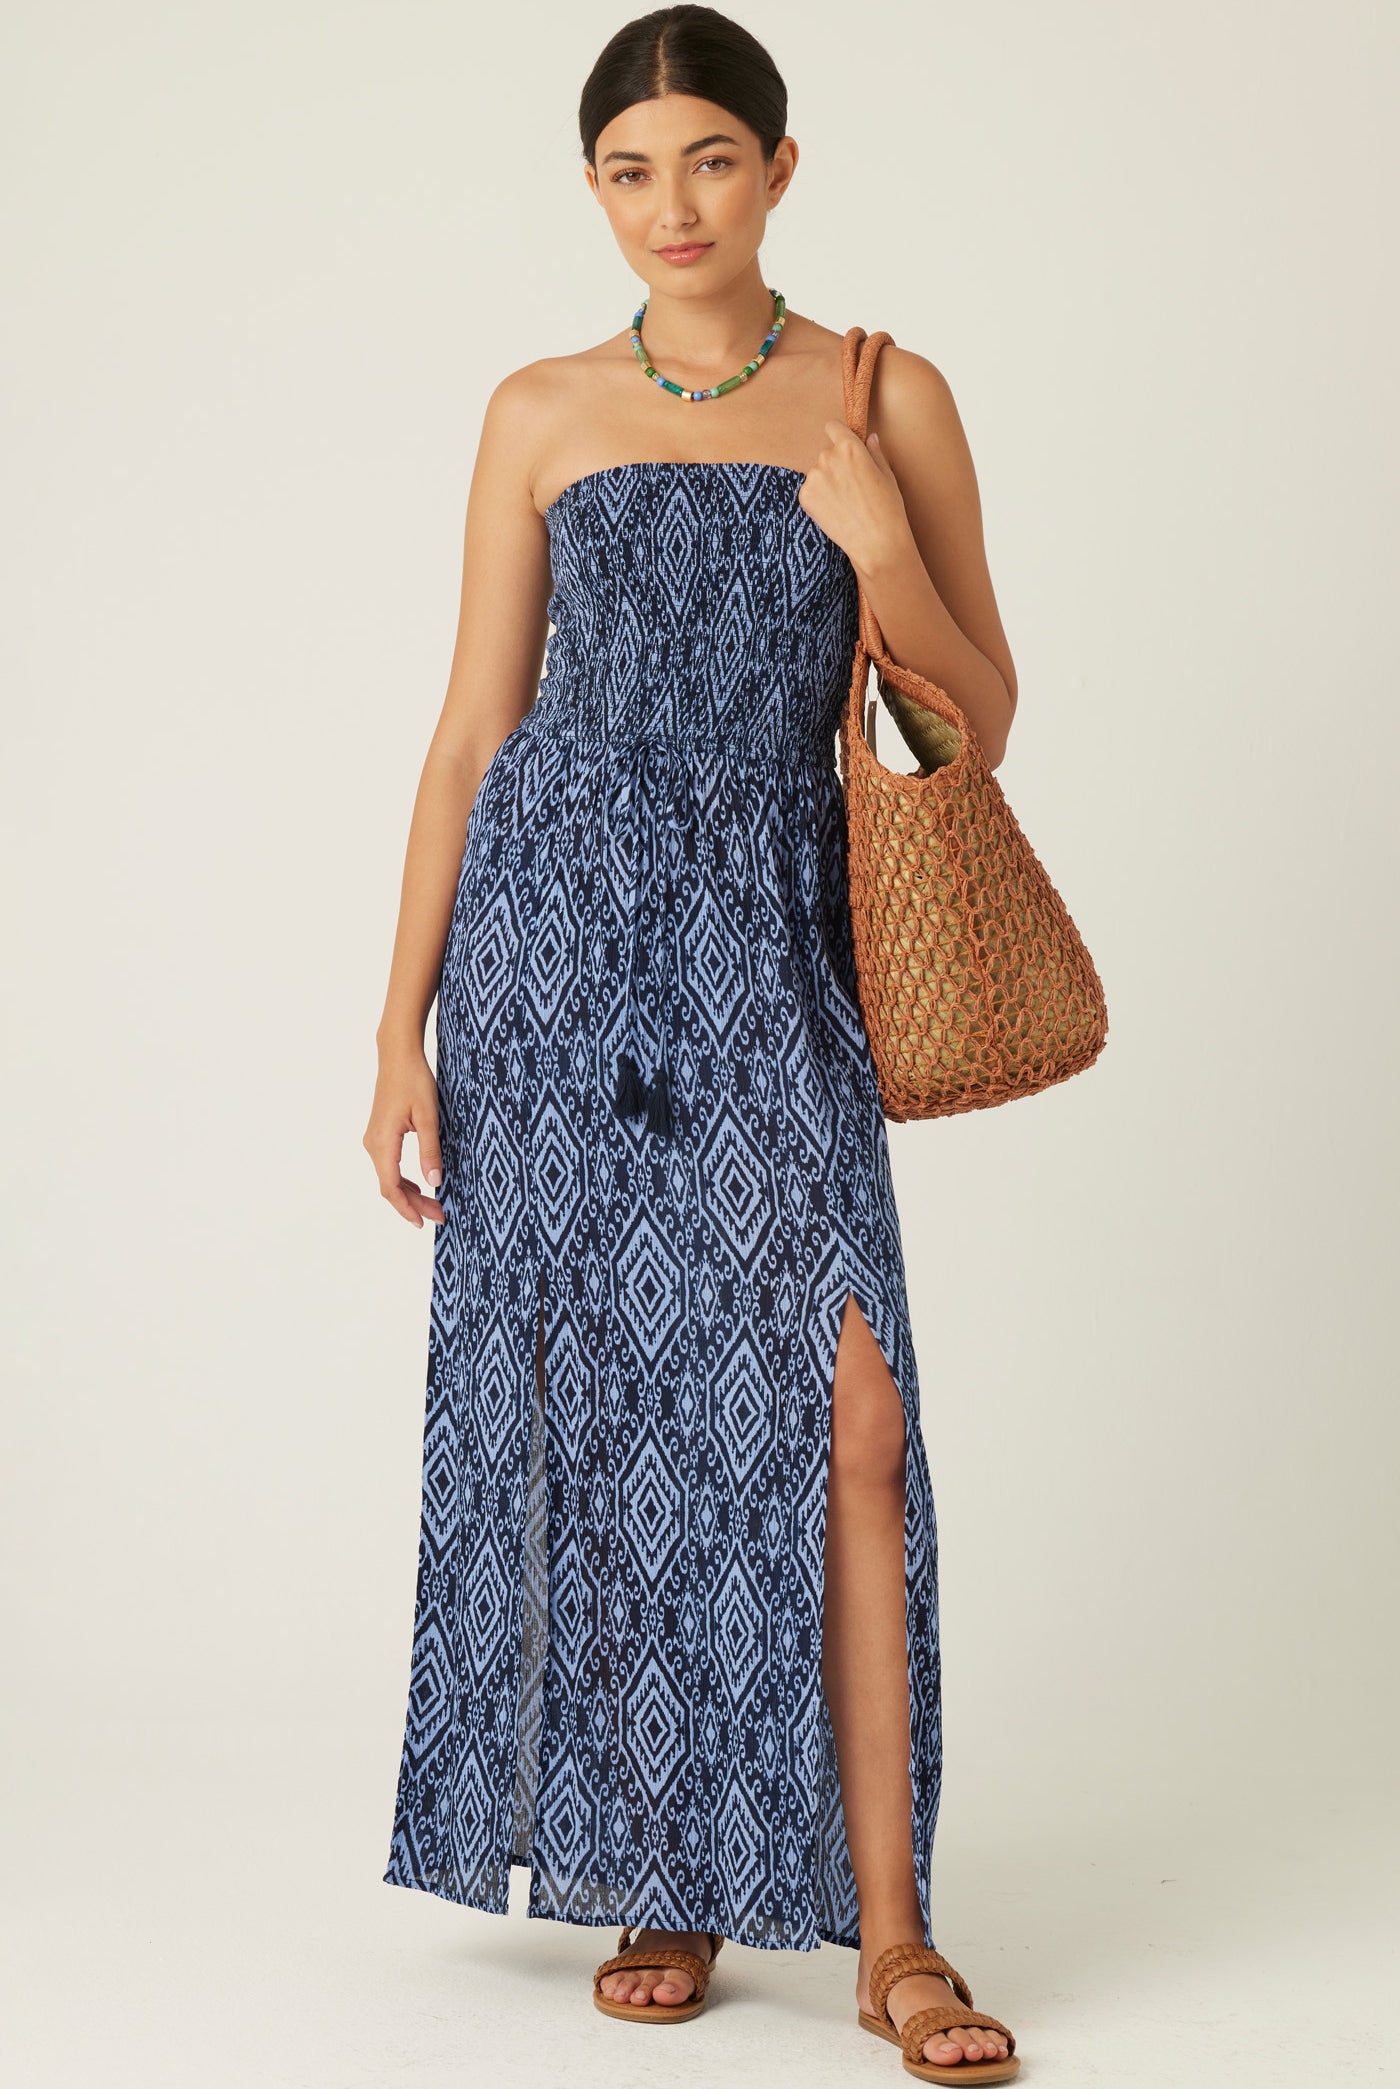 Blue Strapless Printed Dress Apex Ethical Boutique